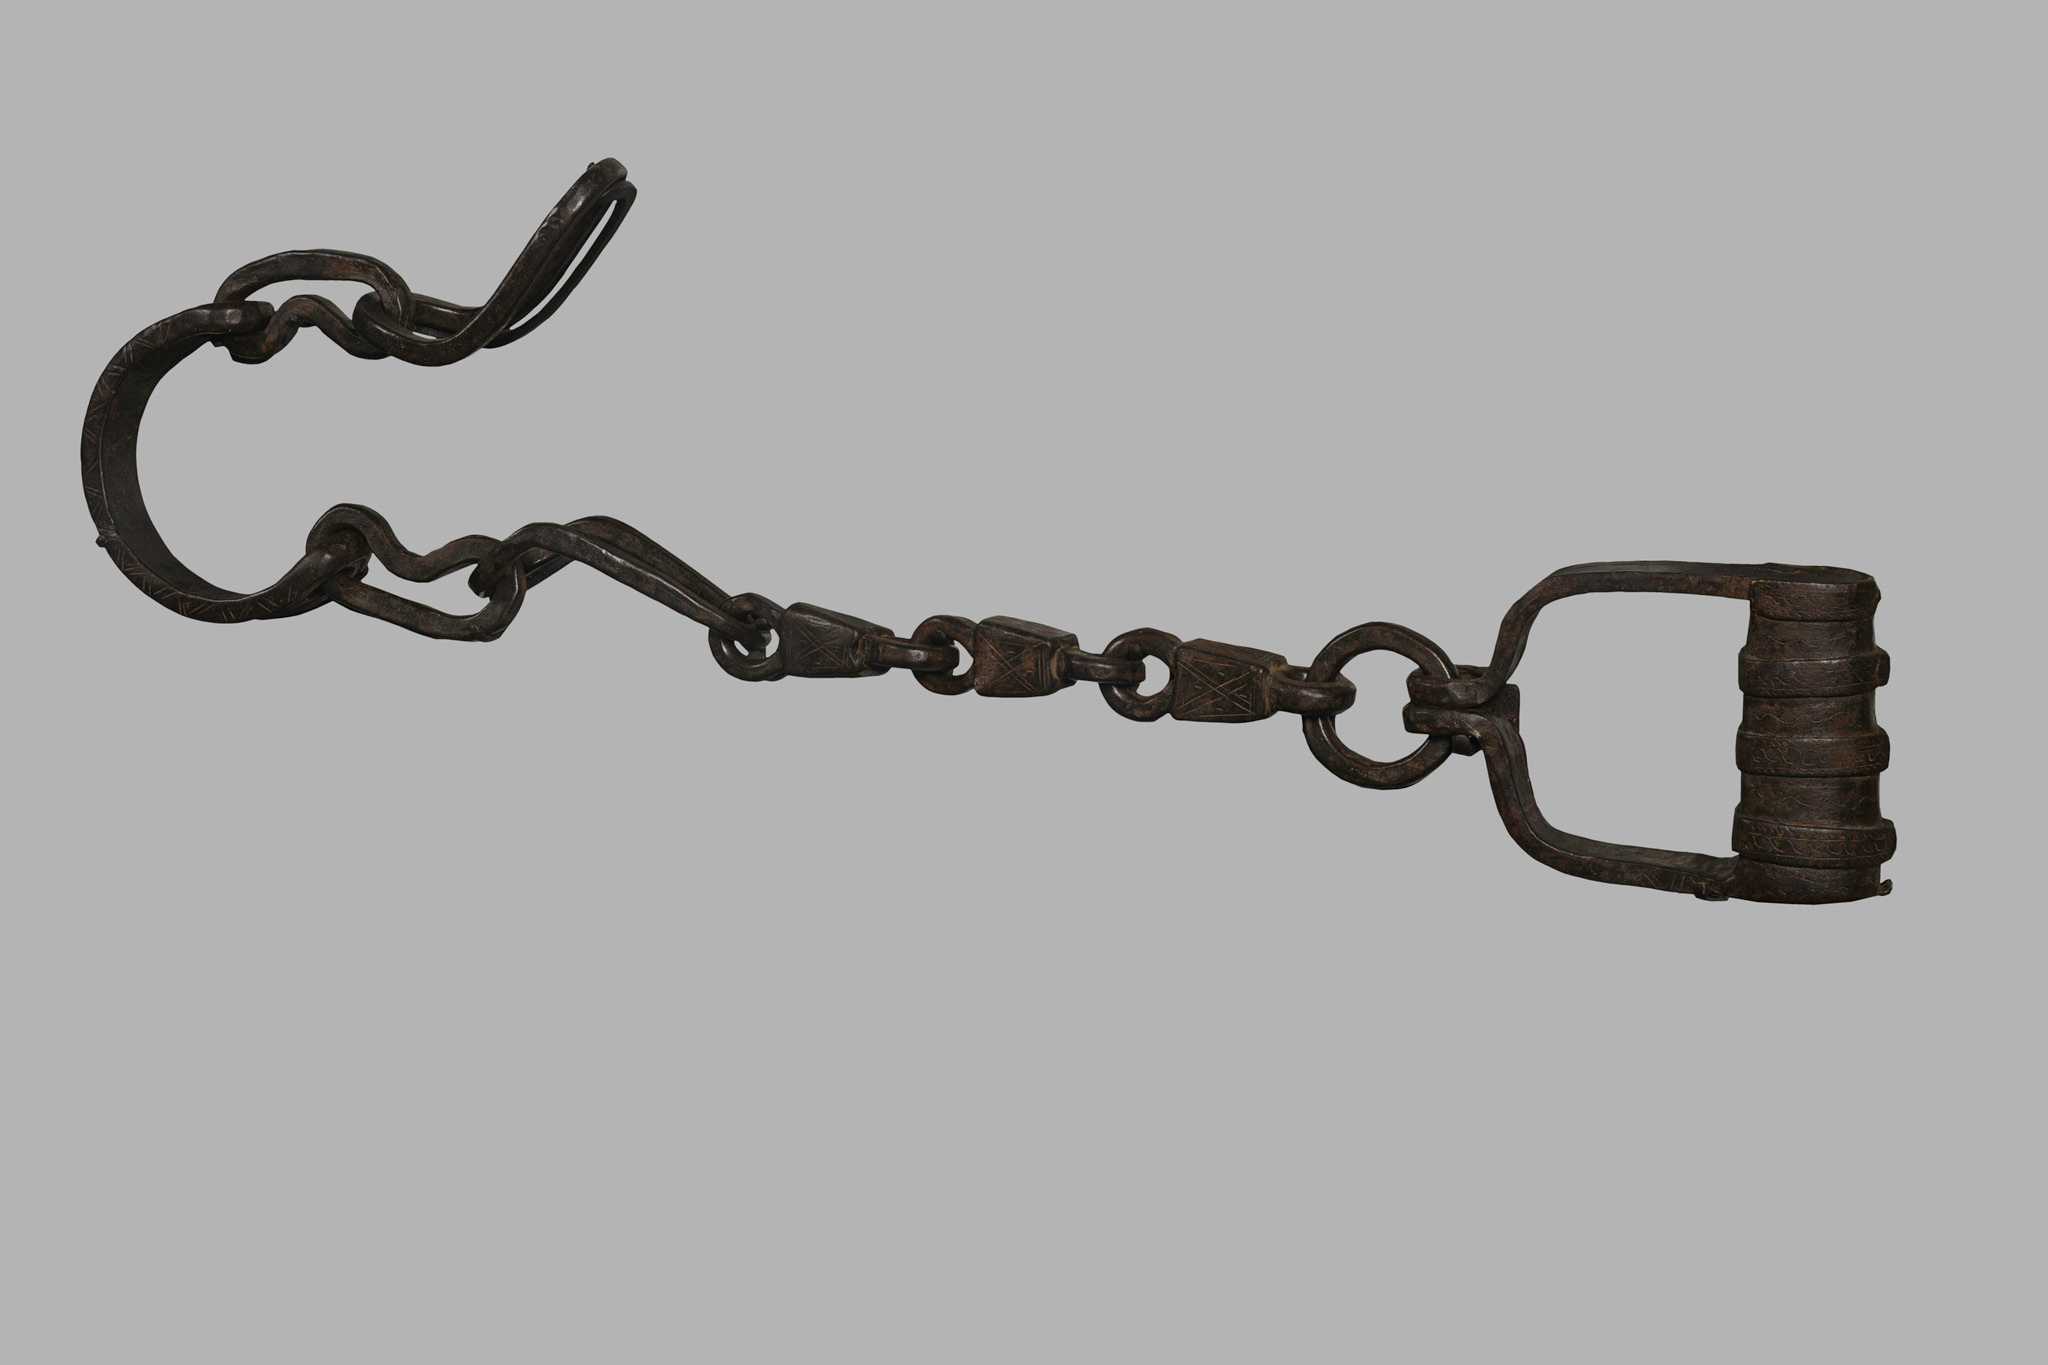 These ankle shackles consist of a two-piece cuff-like section at one end, and another cuff-like piece and locking device at the other; connected by three very heavy and elaborately incised links; all portions of this pair of shackles bear designs that are a series of parallel lines, some crossed into X-shapes.